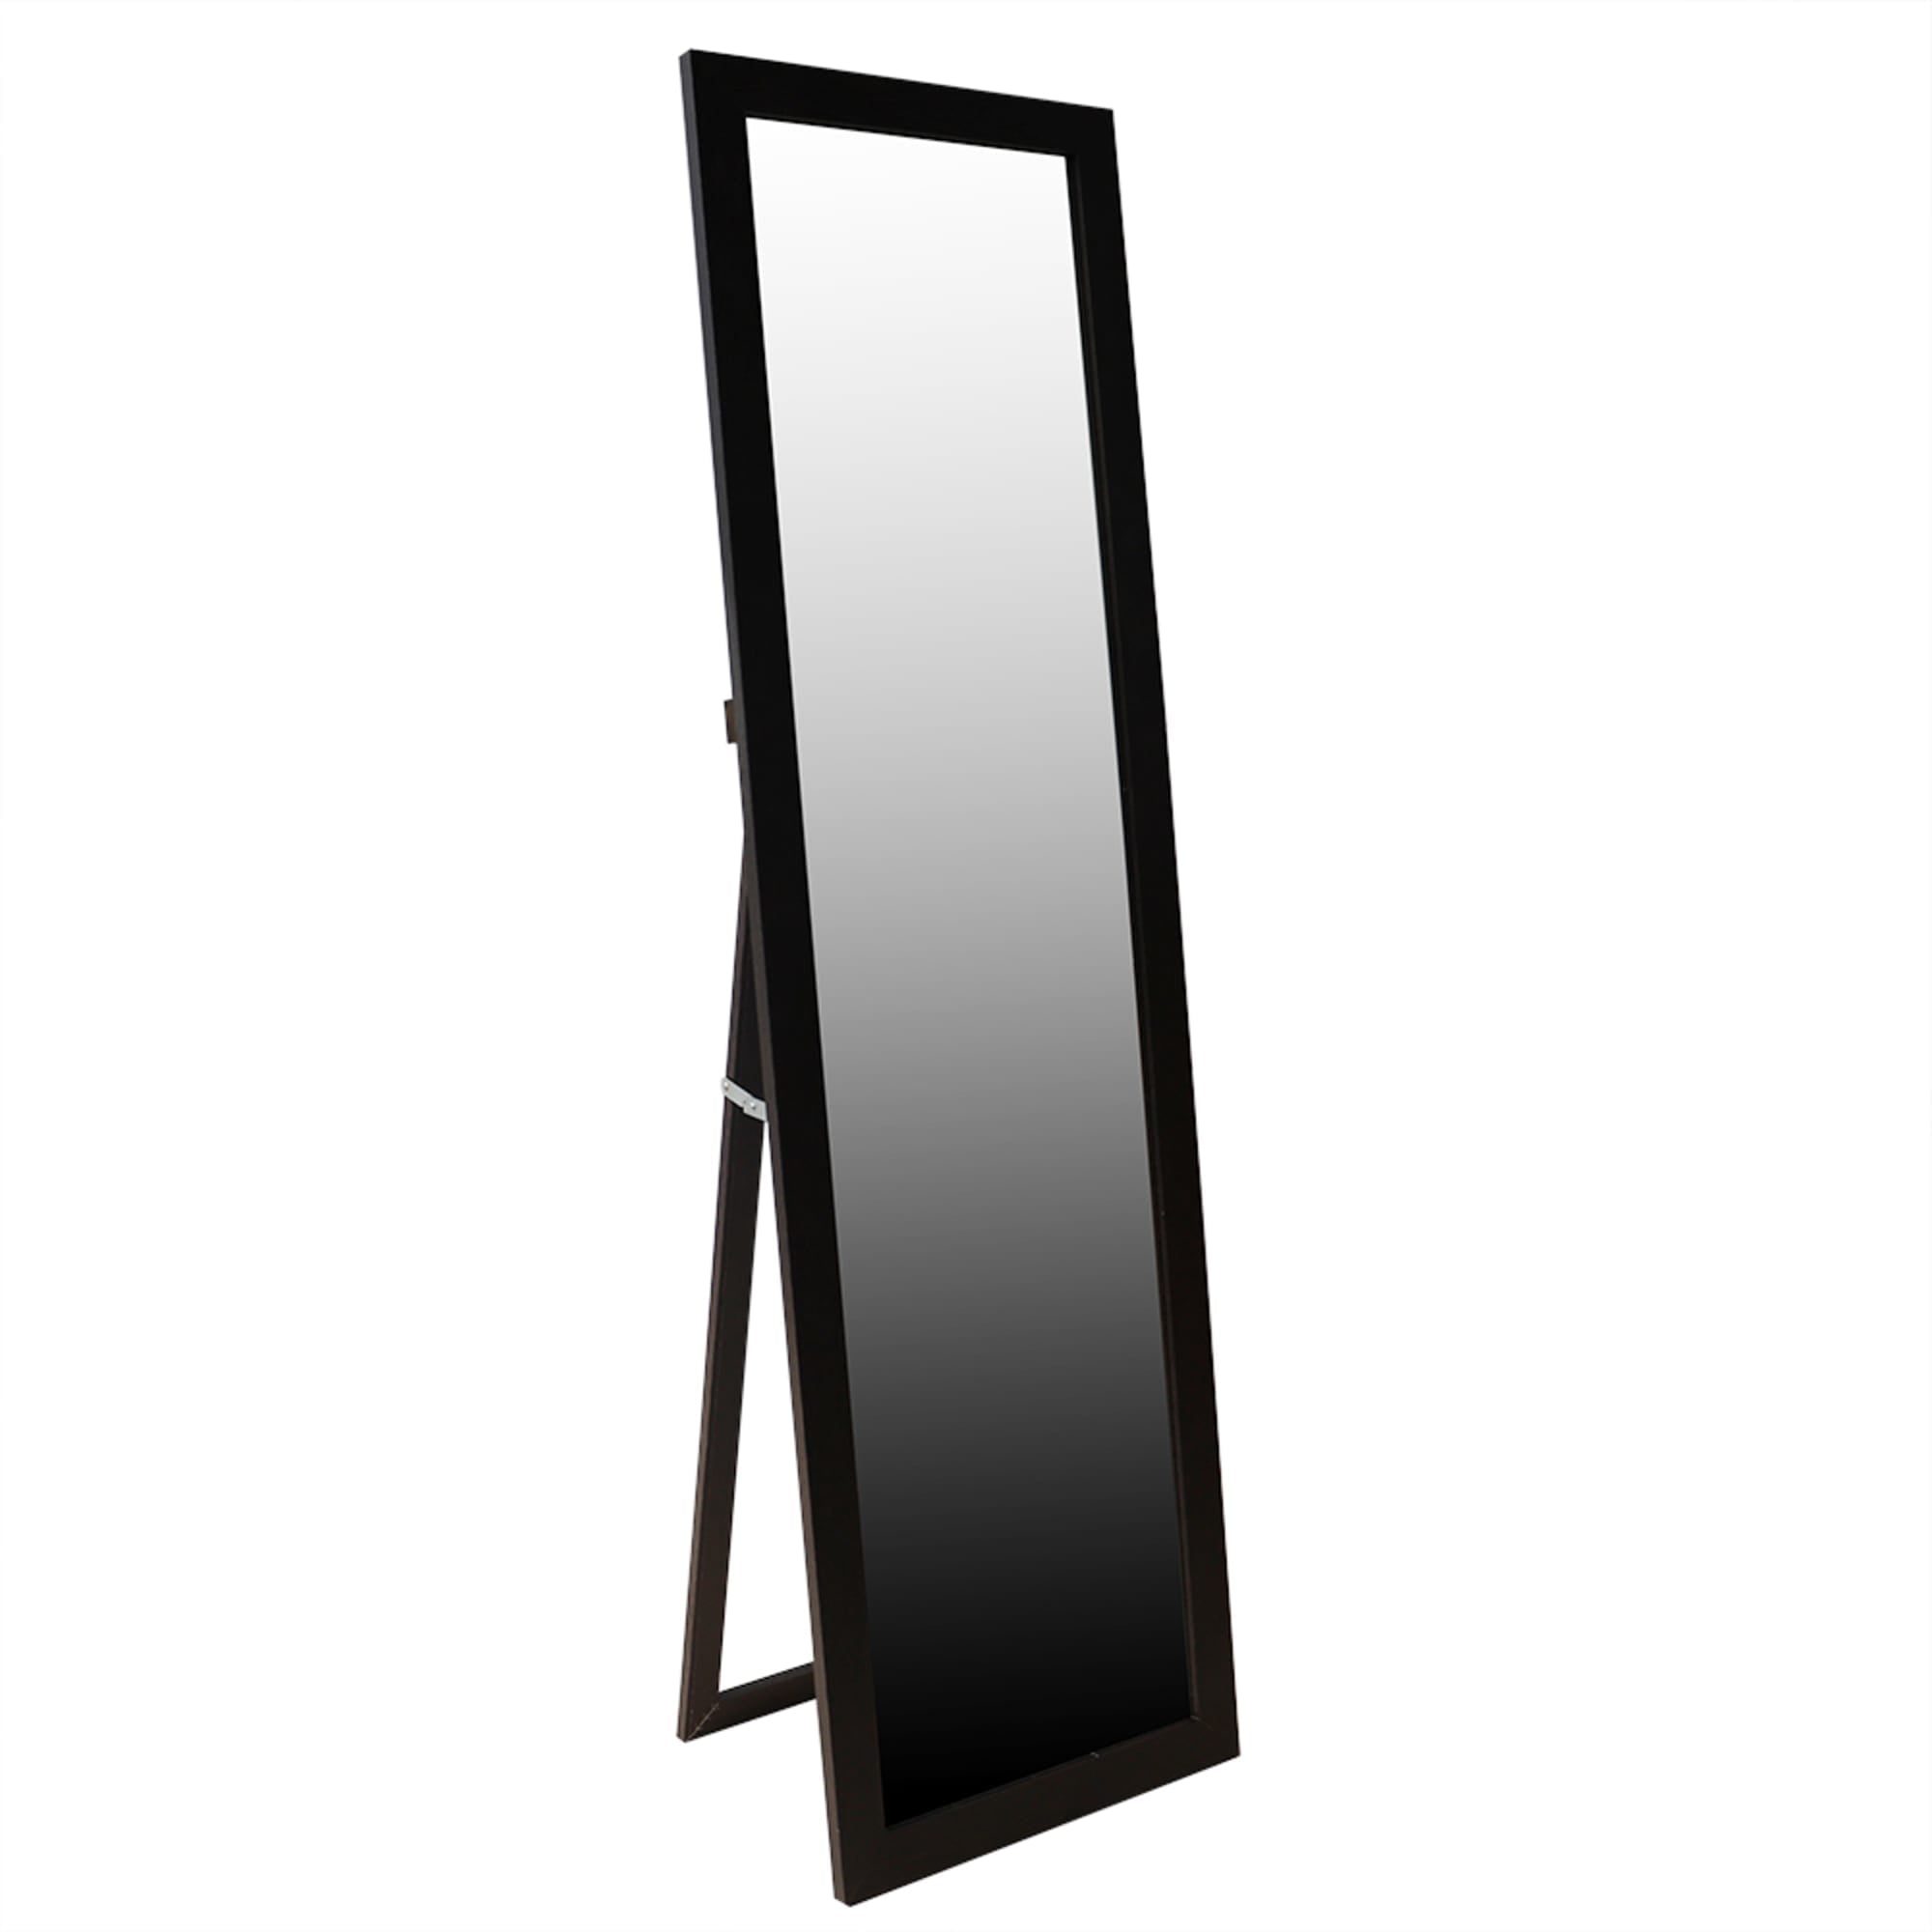 Home Basics Easel Back Full Length Mirror with MDF Frame, Mahogany $15.00 EACH, CASE PACK OF 6